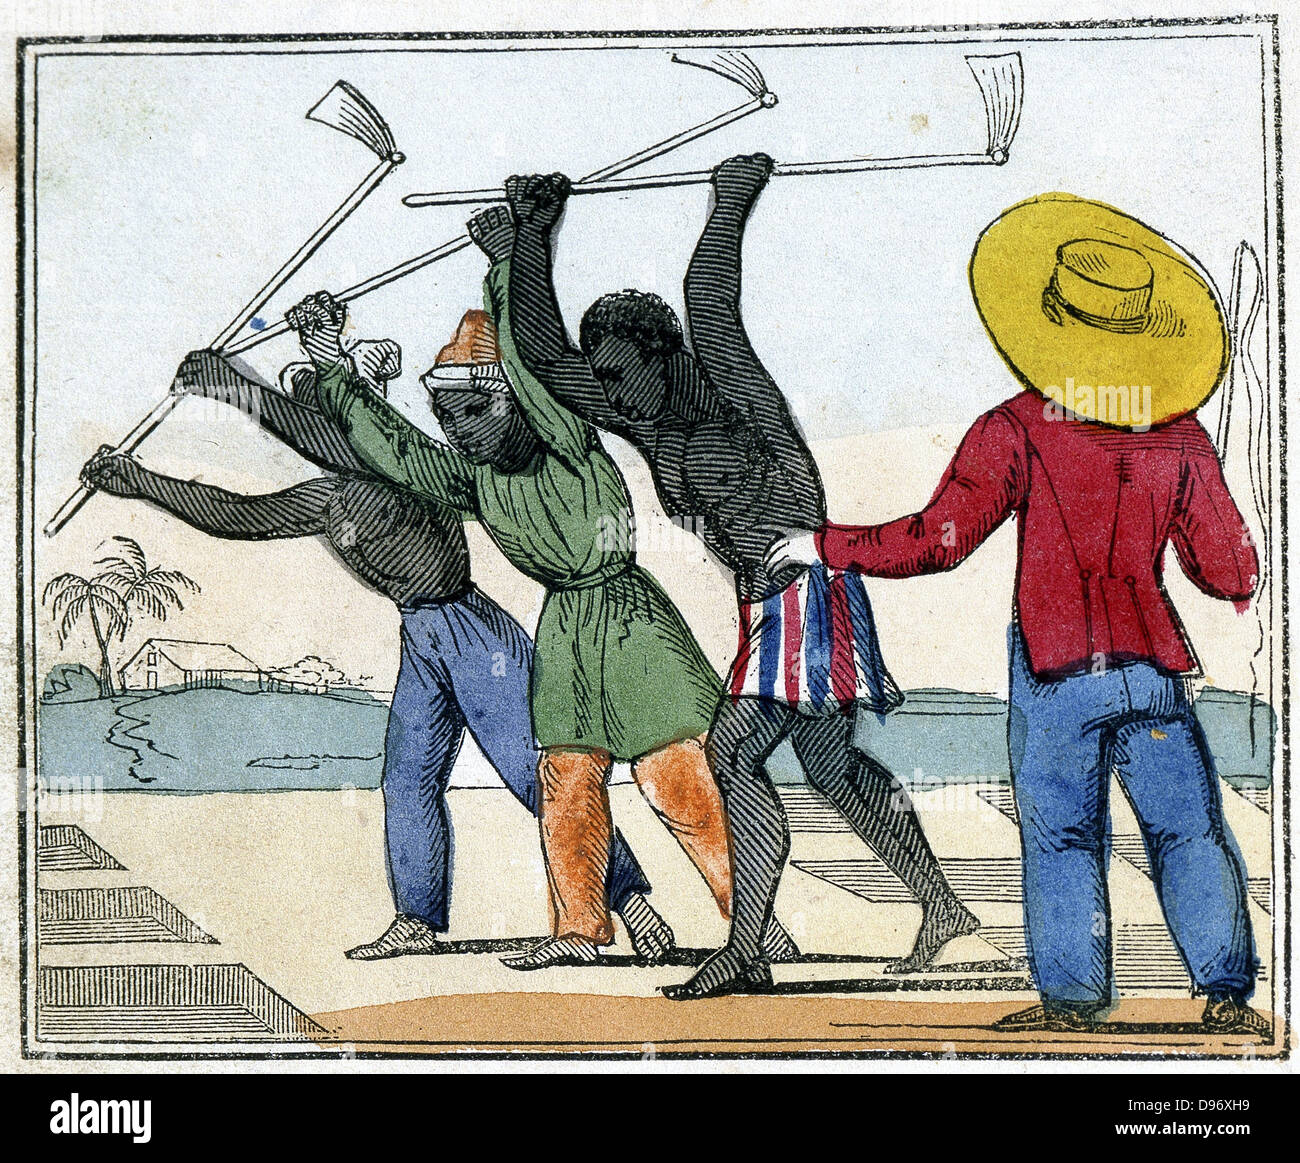 Black slaves working in the cane fields: Holing. Overseer with whip stands  over them. West Indies?